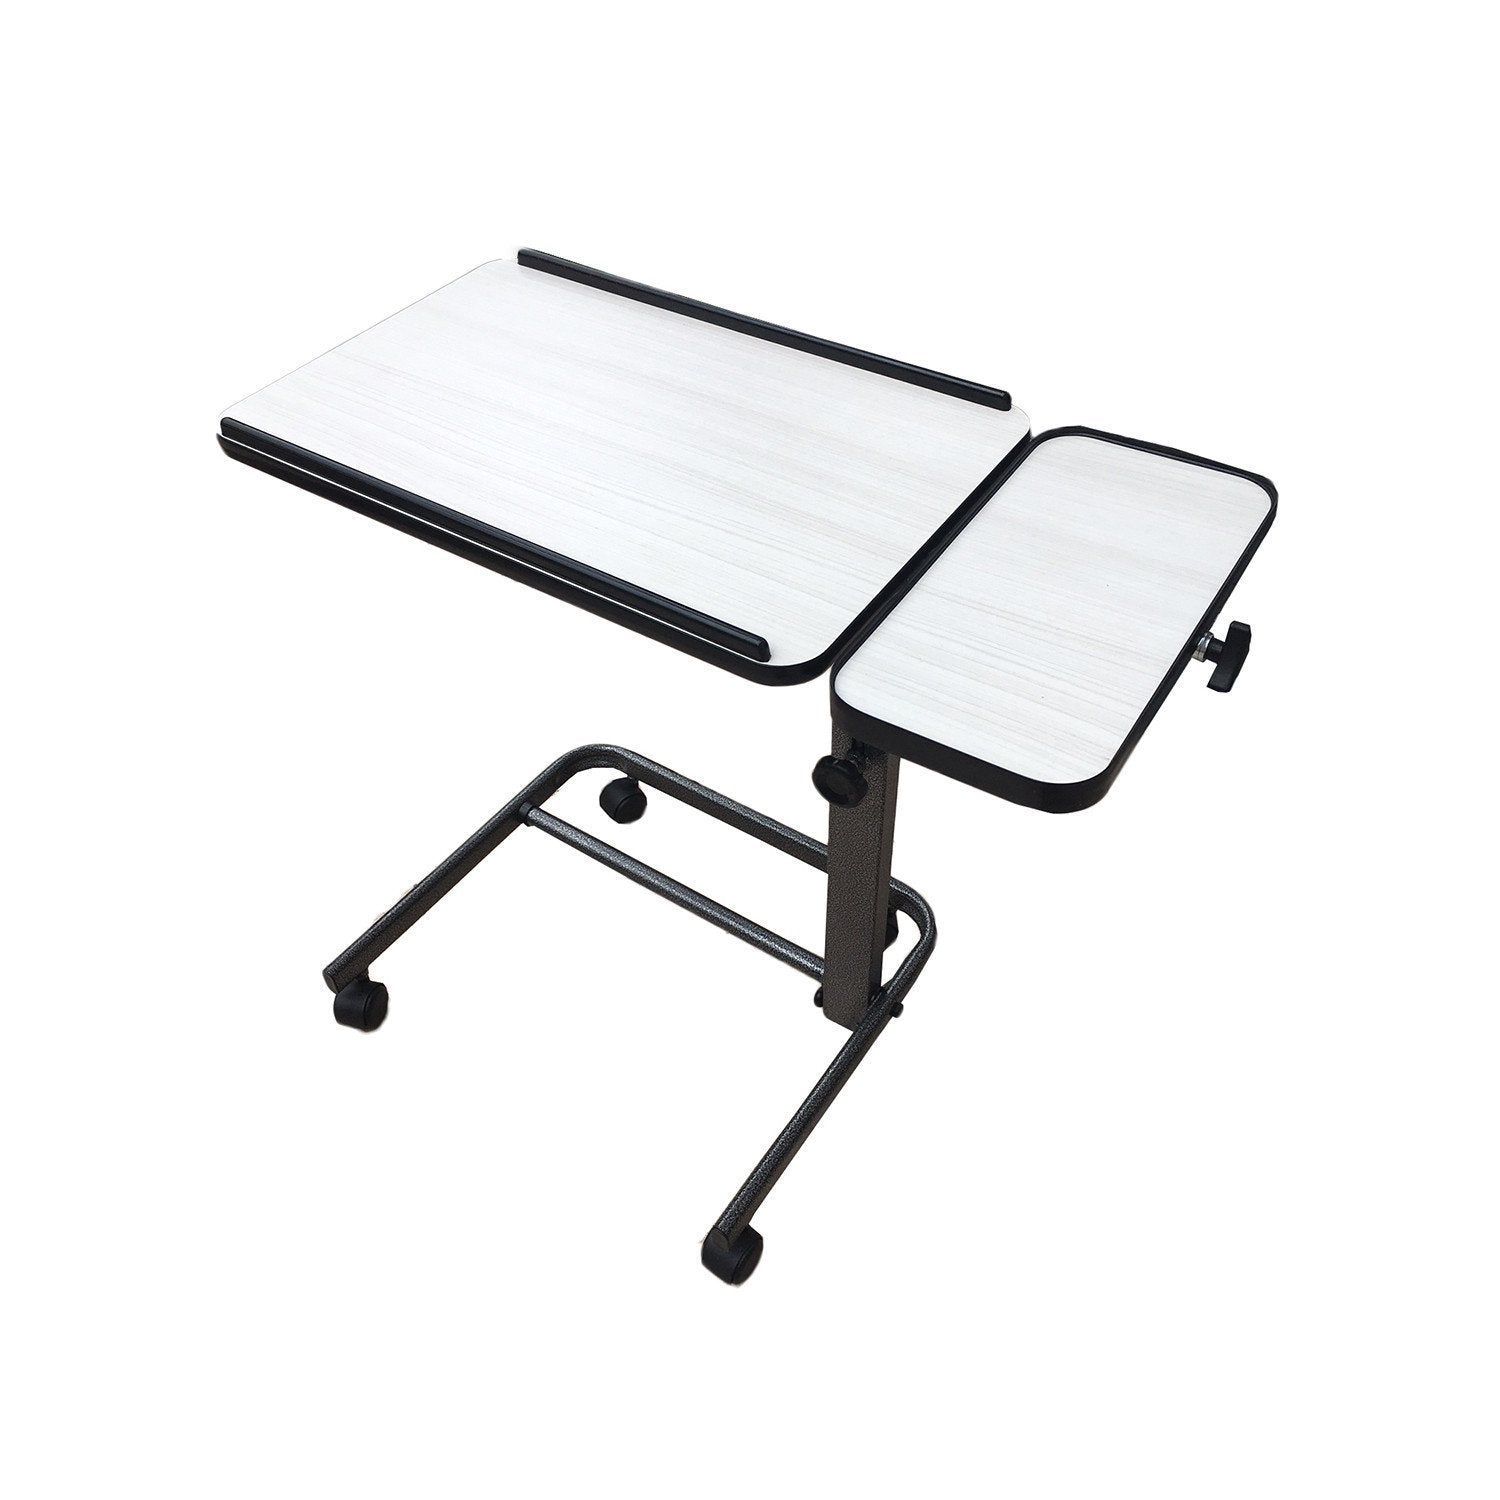 Acrobat Adjustable Overbed (or) Laptop Table - White Birch